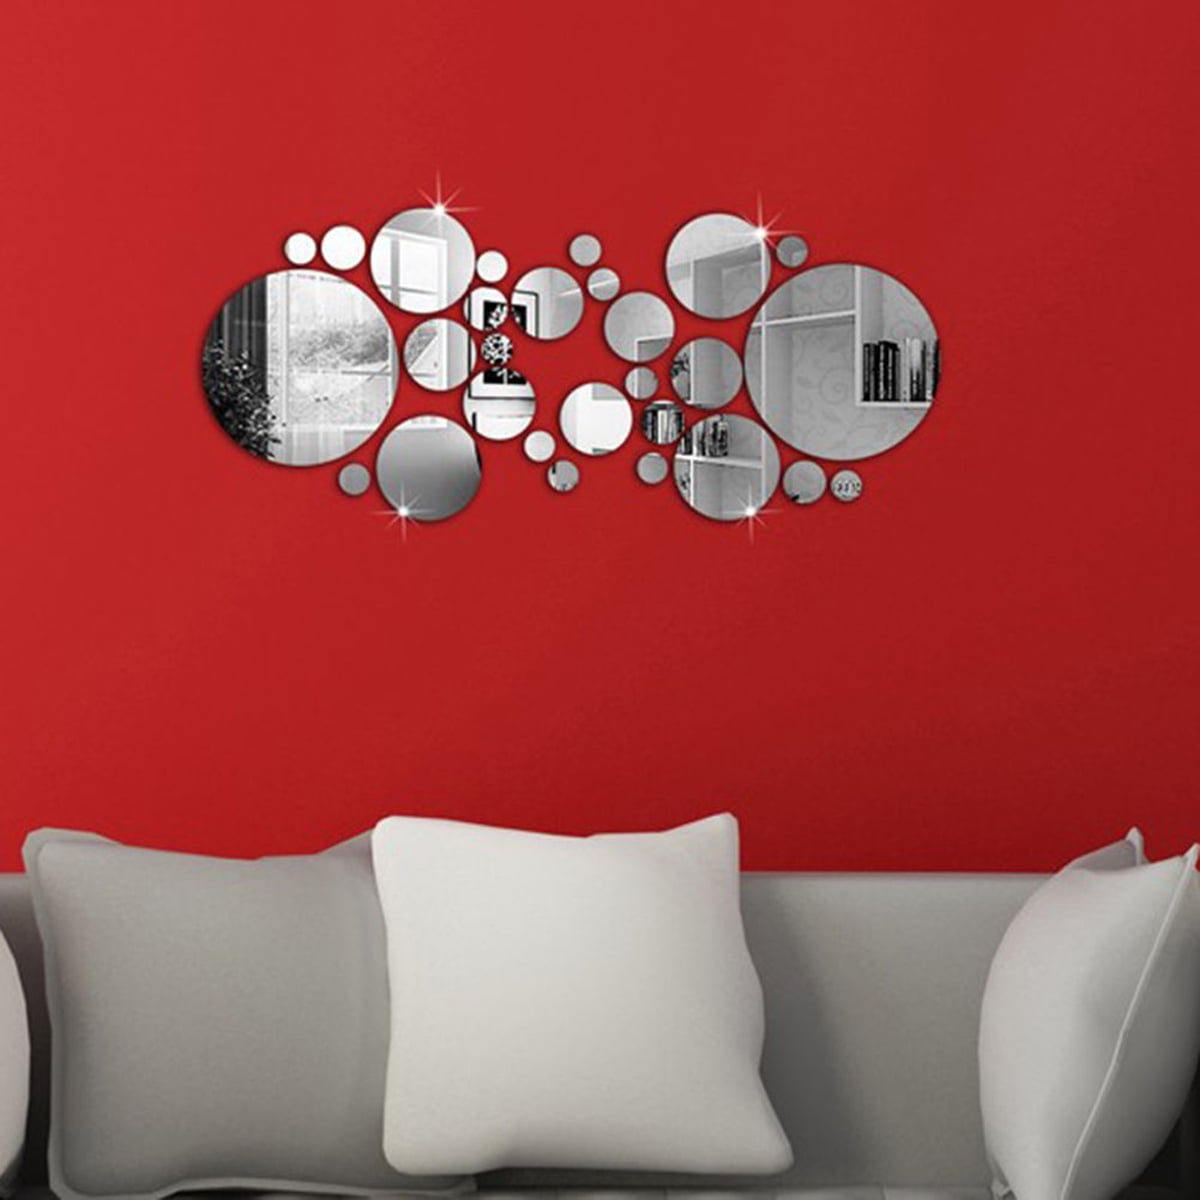 3D Star Mirror Removable Wall Sticker Acrylic Decal Sticker Living Room Decor CB